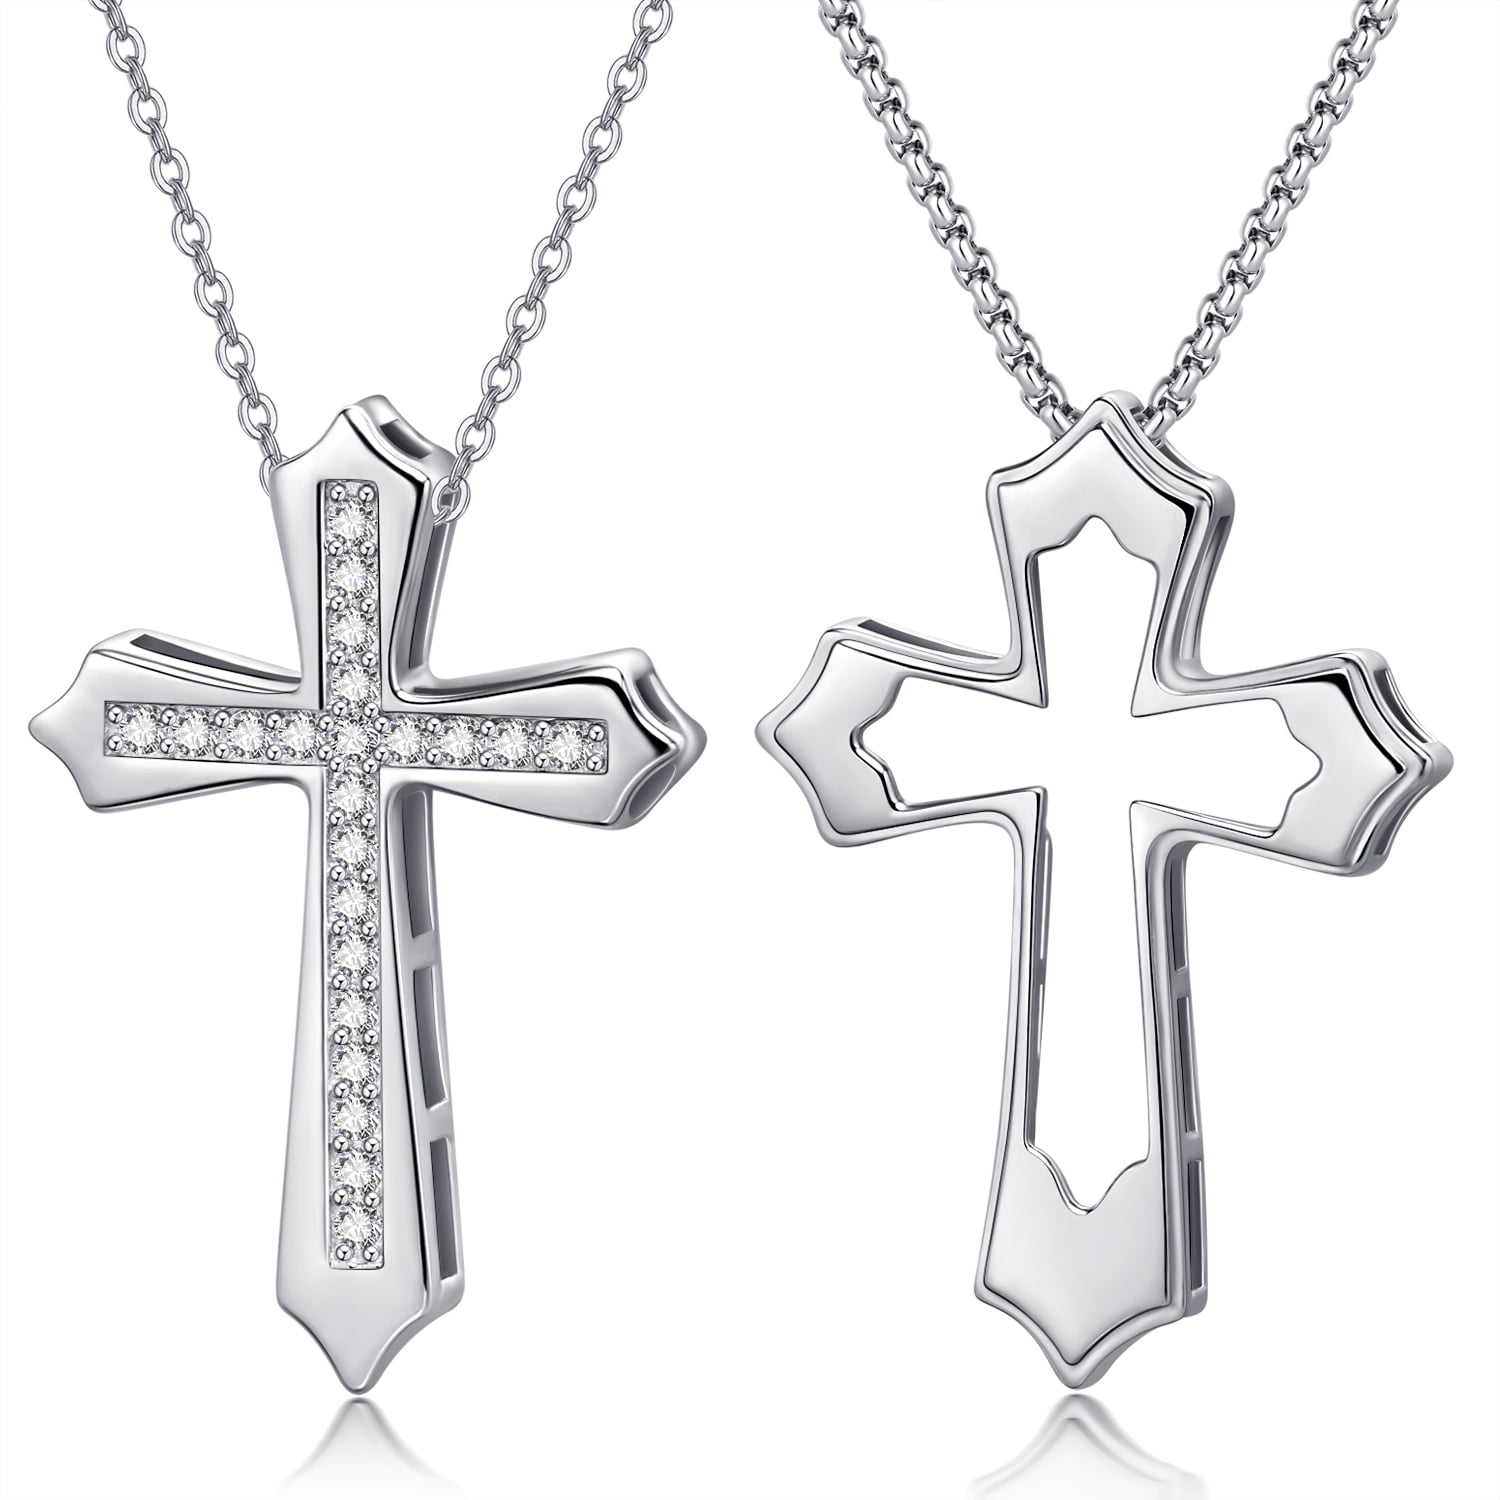 Weddinen Cross Necklace for Men Boys Stainless Steel Cross Pendant Chain  American Flag Country Necklaces Religious Christian Holy Cross Mens jewelry  Necklaces Gifts（Silver） - Walmart.com